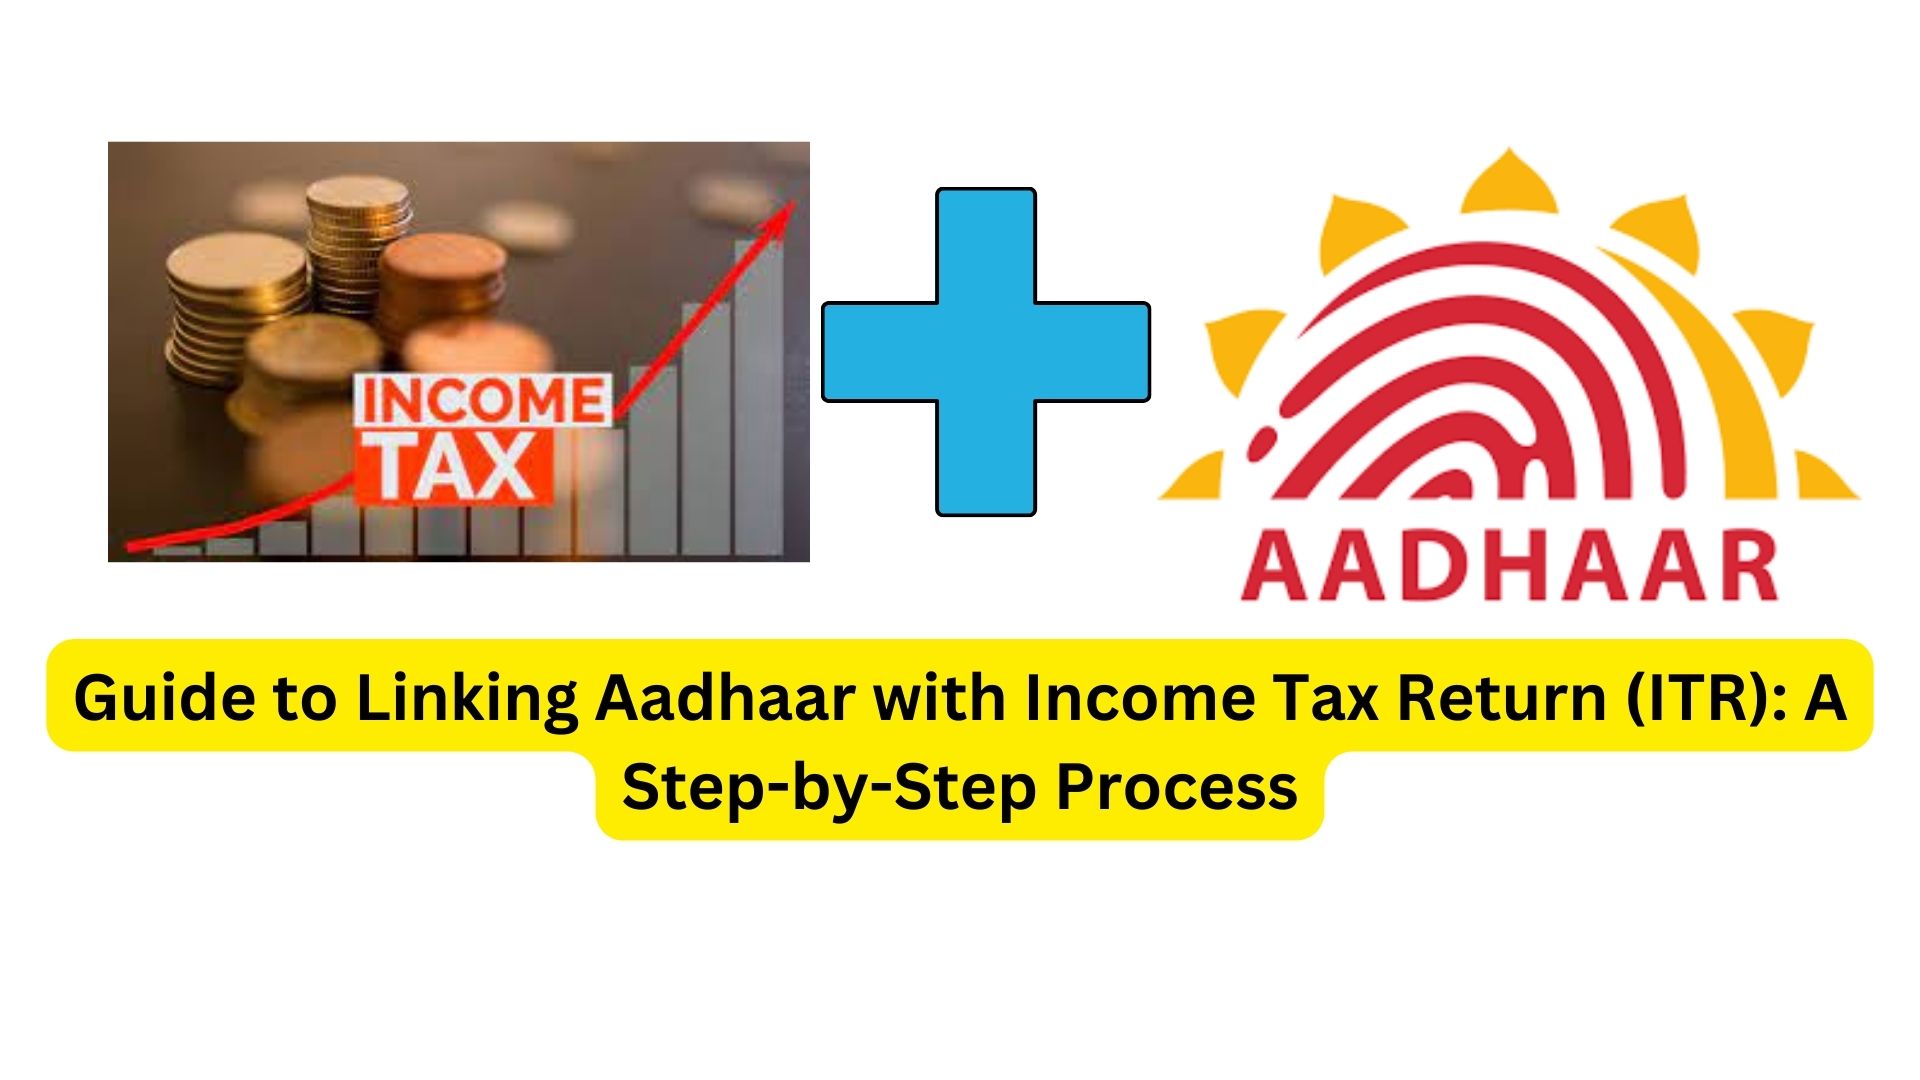 Guide to Linking Aadhaar with Income Tax Return (ITR): A Step-by-Step Process